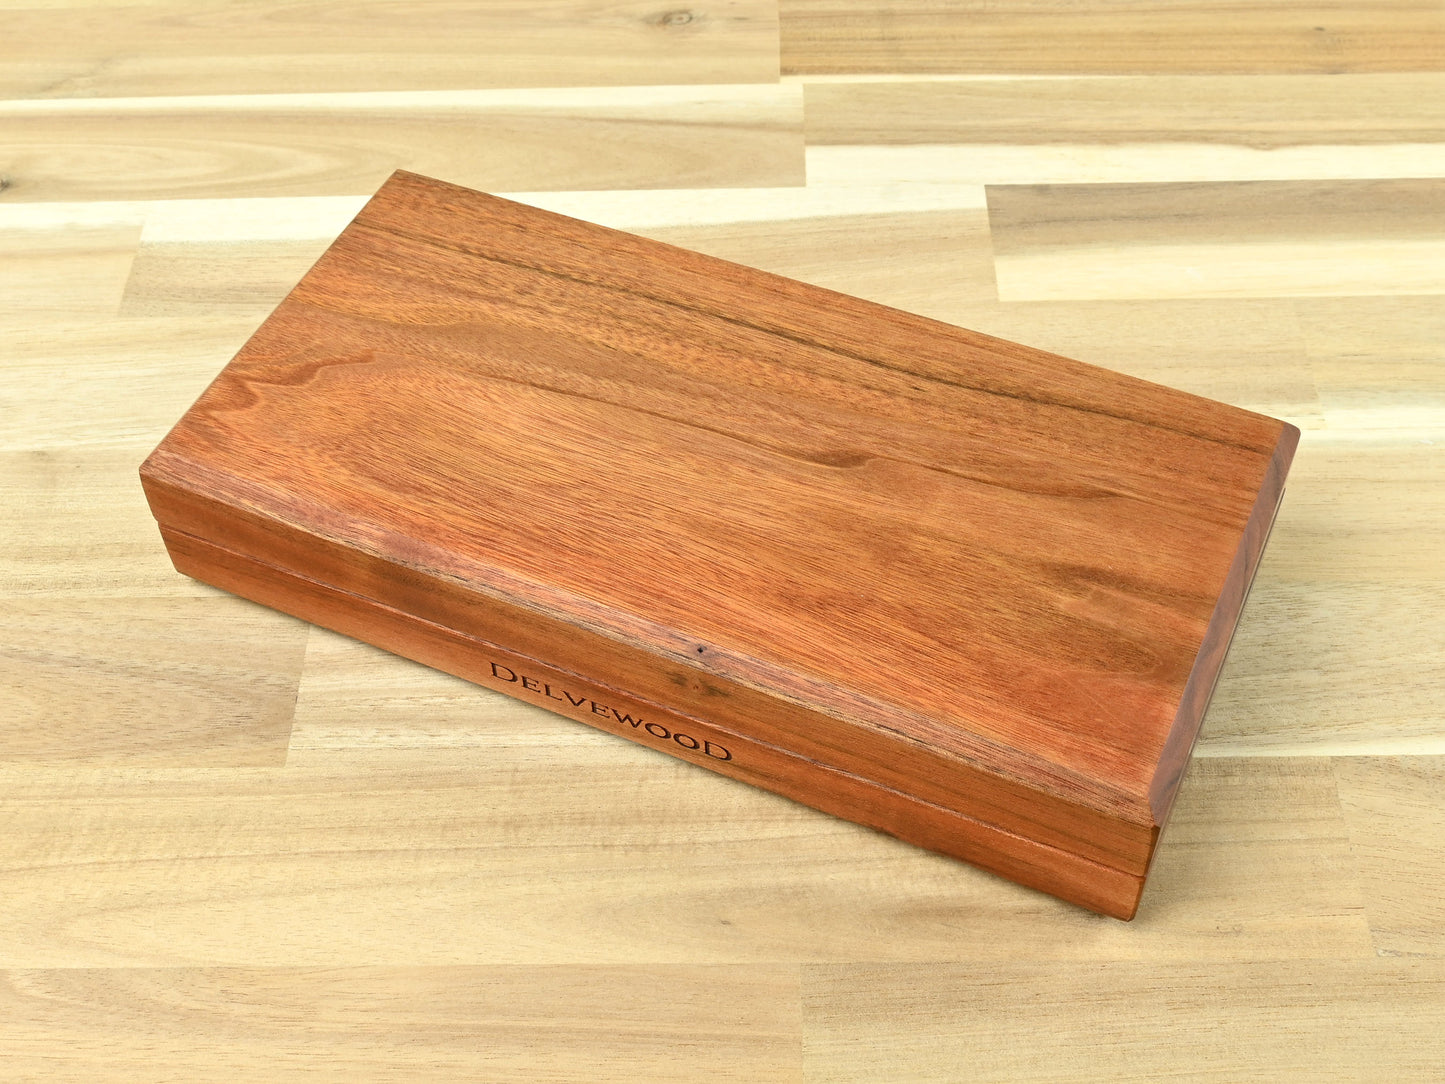 Patagonian Rosewood Delver's kit dice box and tray for dnd rpg